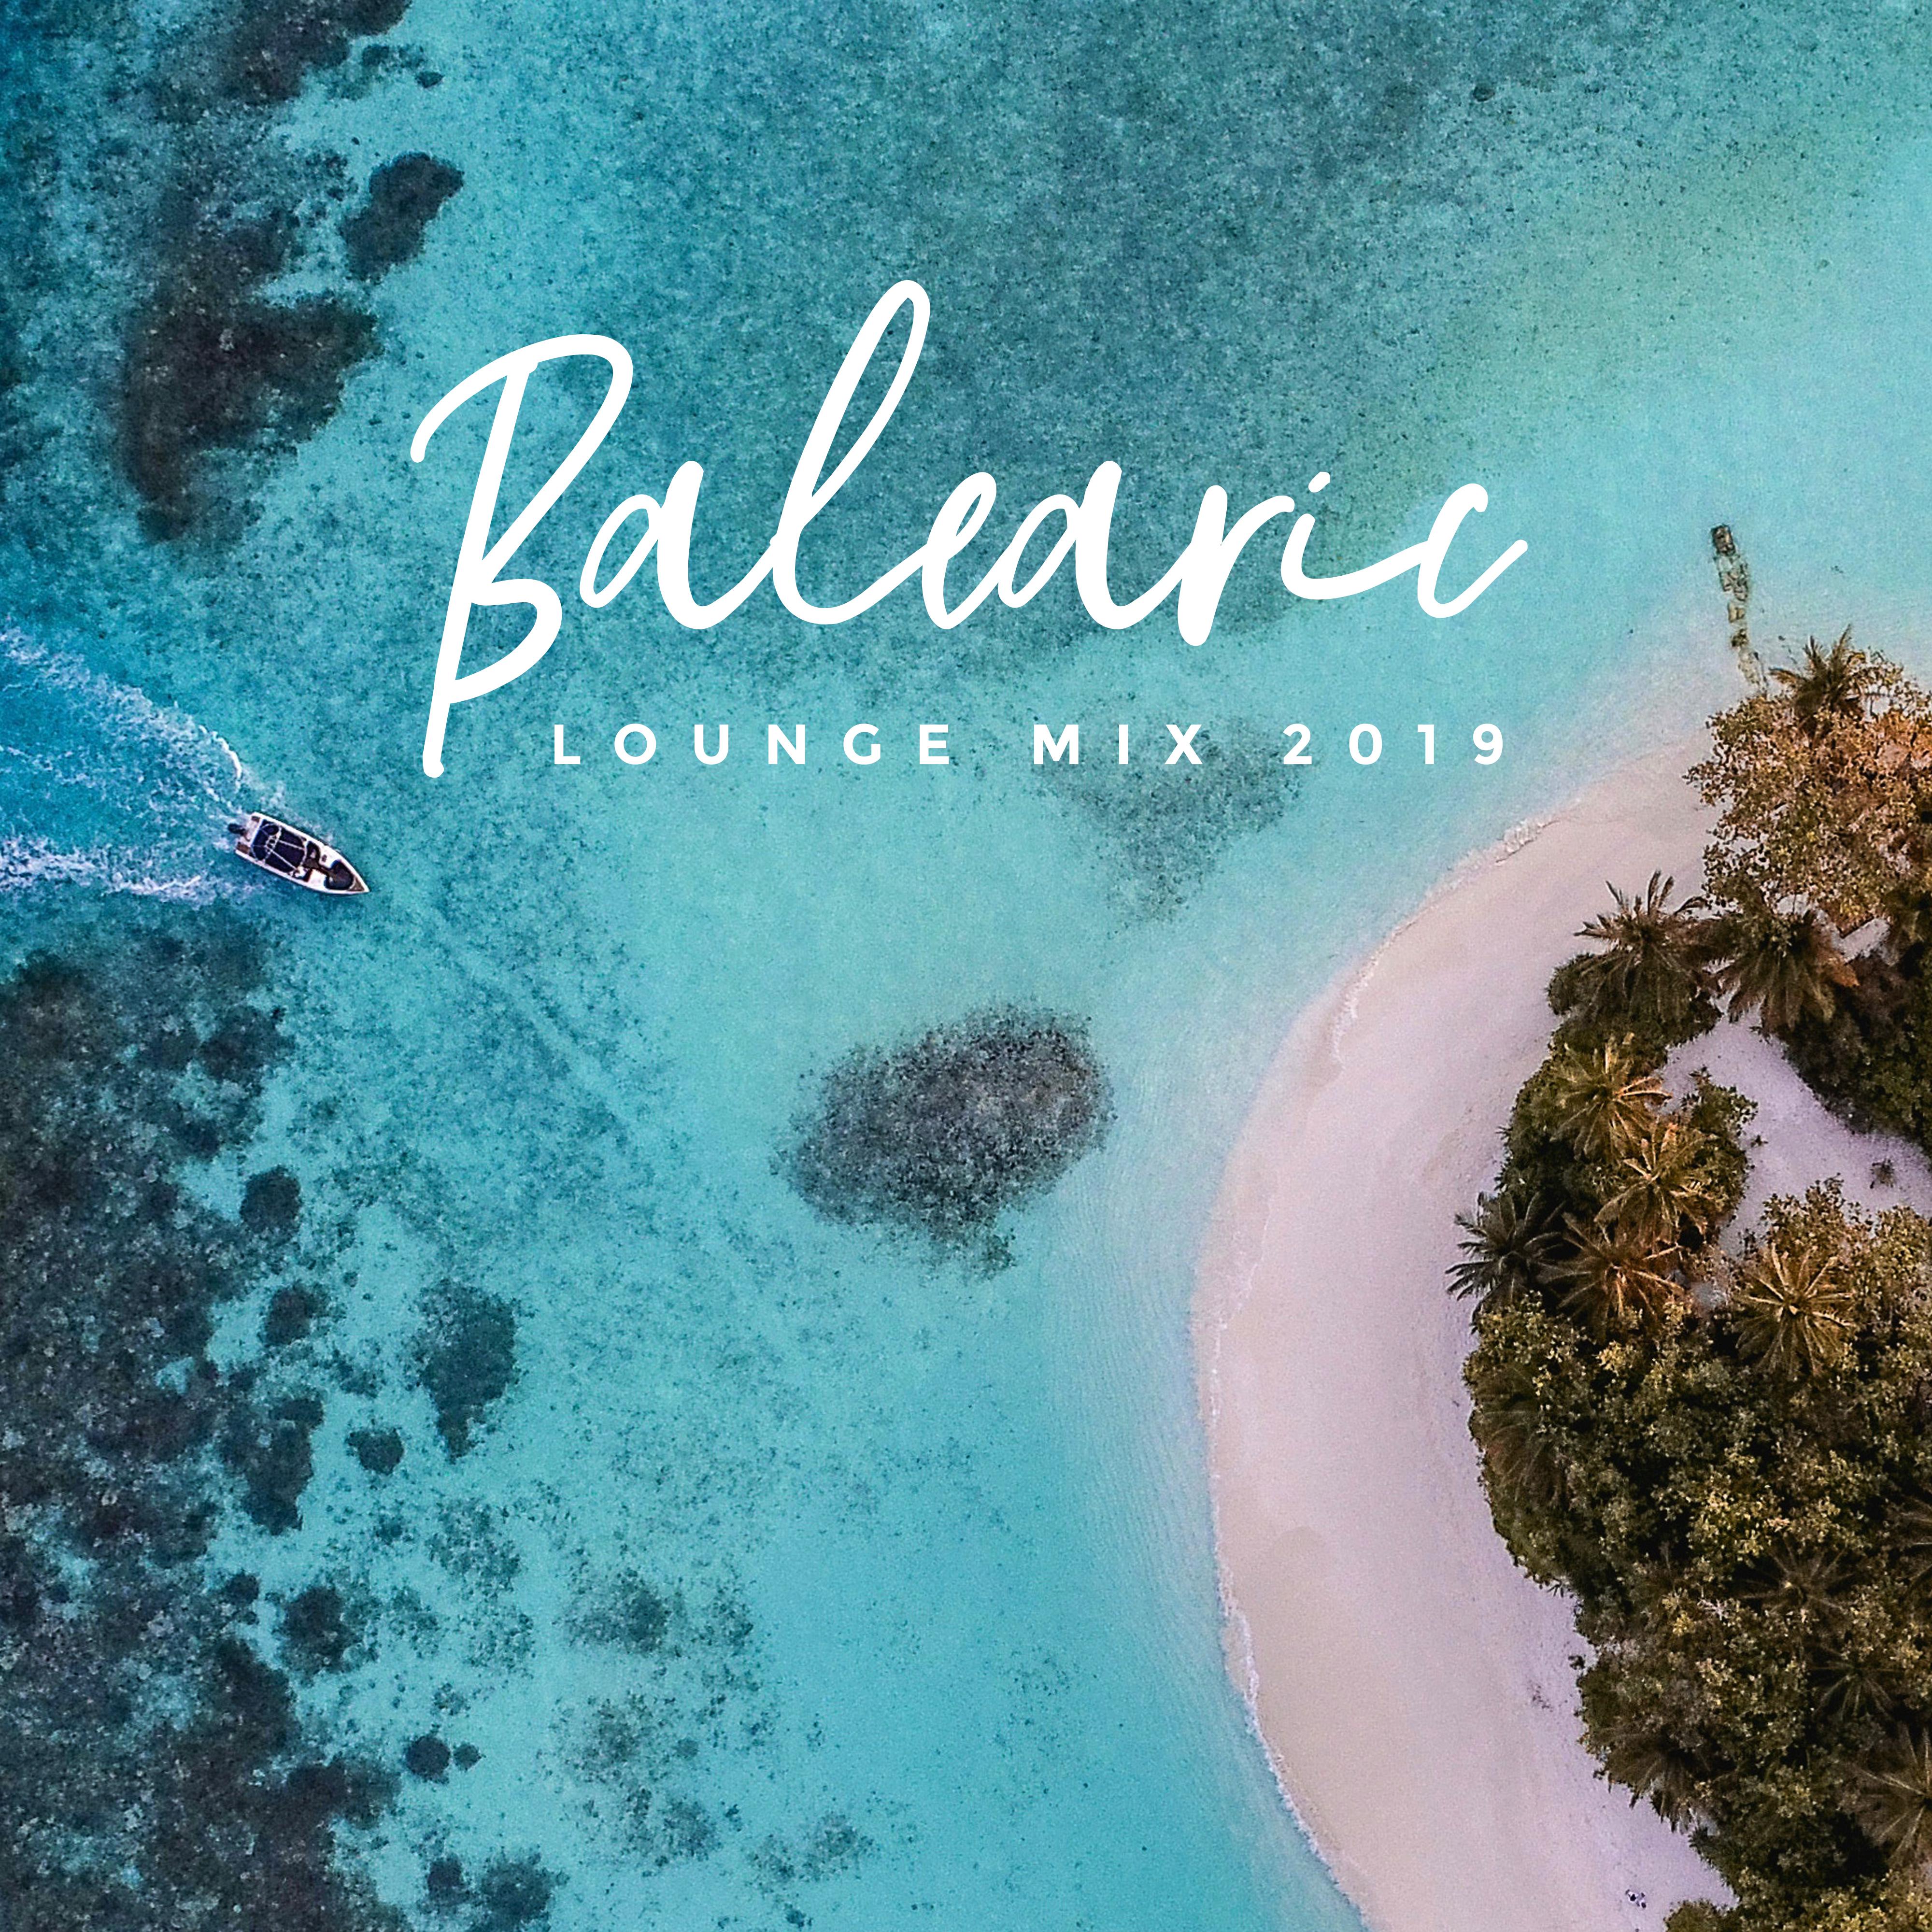 Balearic Lounge Mix 2019 – Top Chillout Music Compilation, Energetic Vibes, Tropical Summer Beats, Beach Party